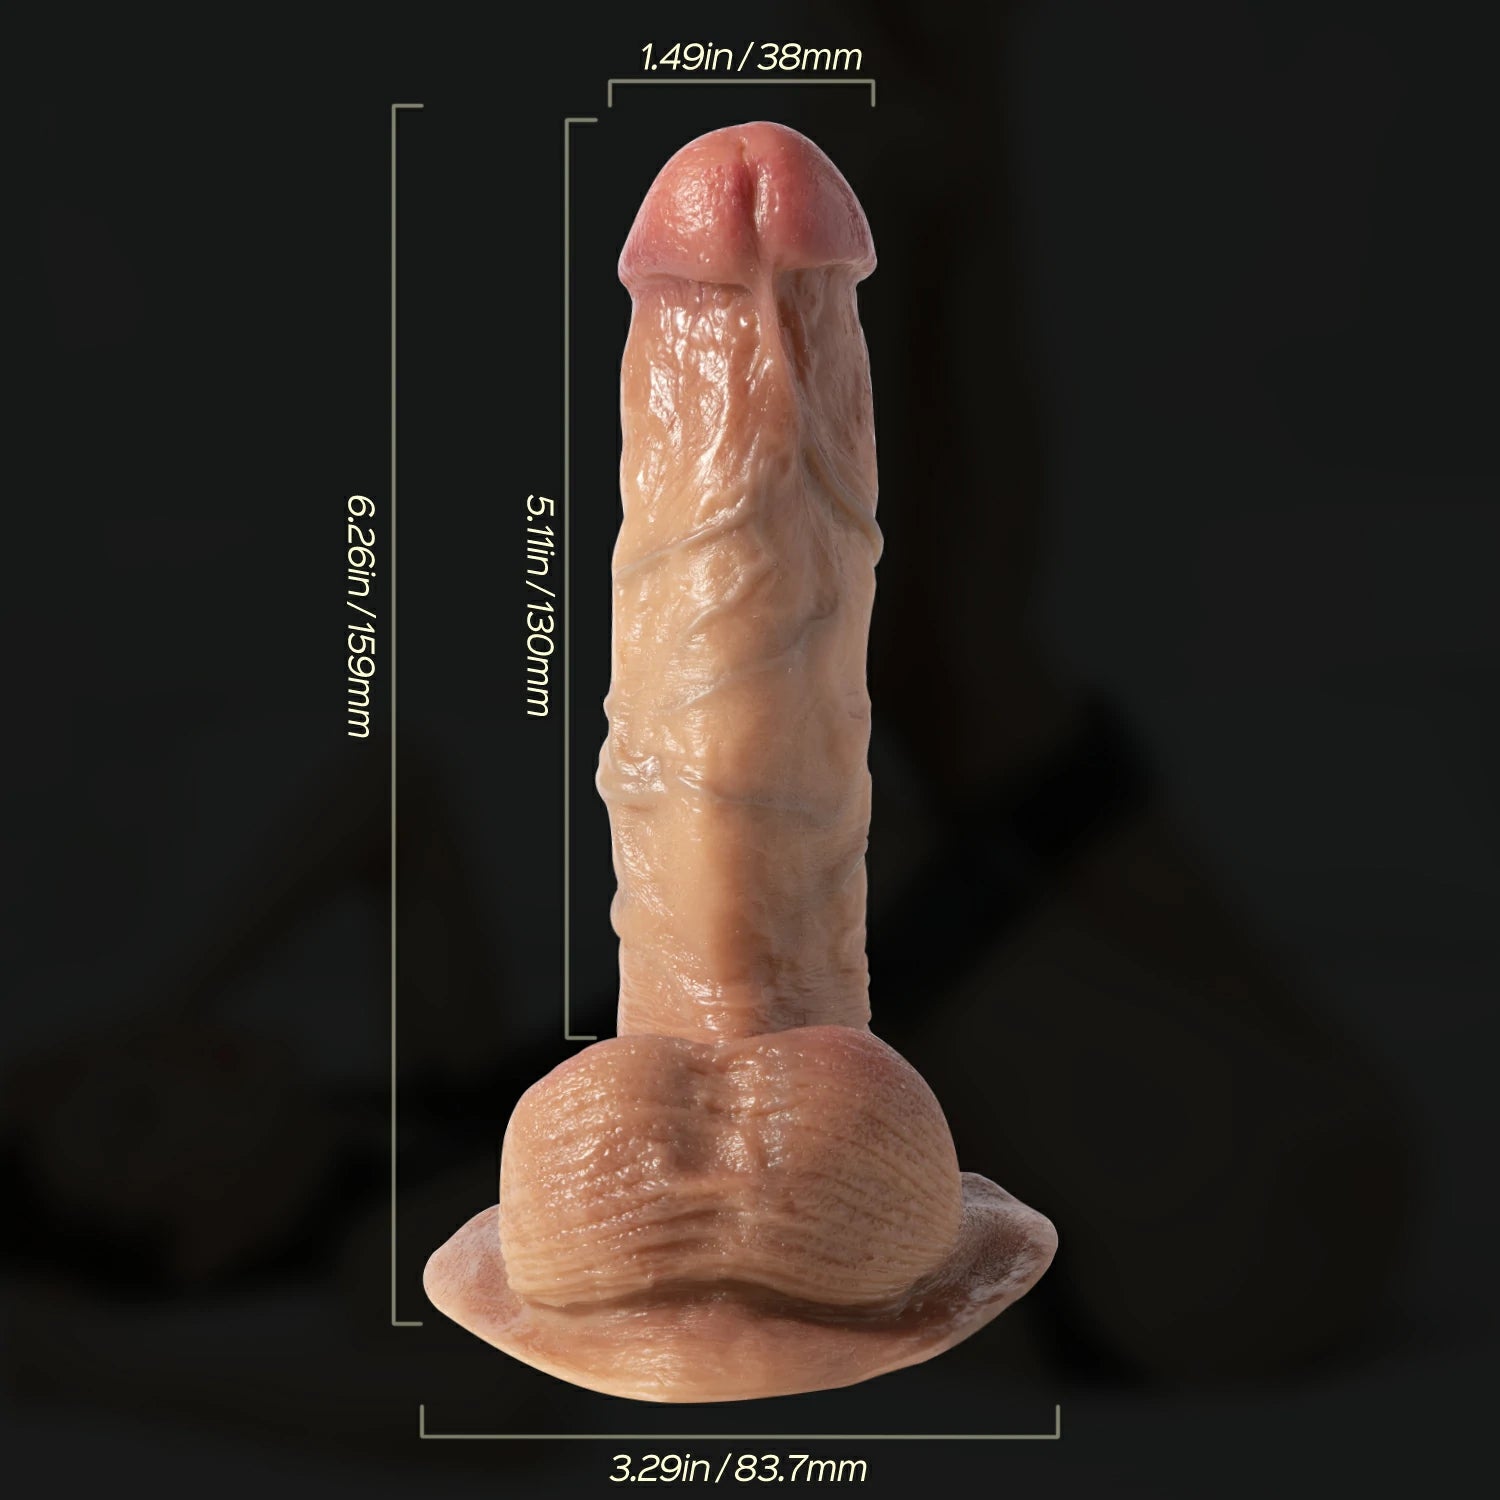 Dai - 5.2-inch Realistic Suction Cup Dildo